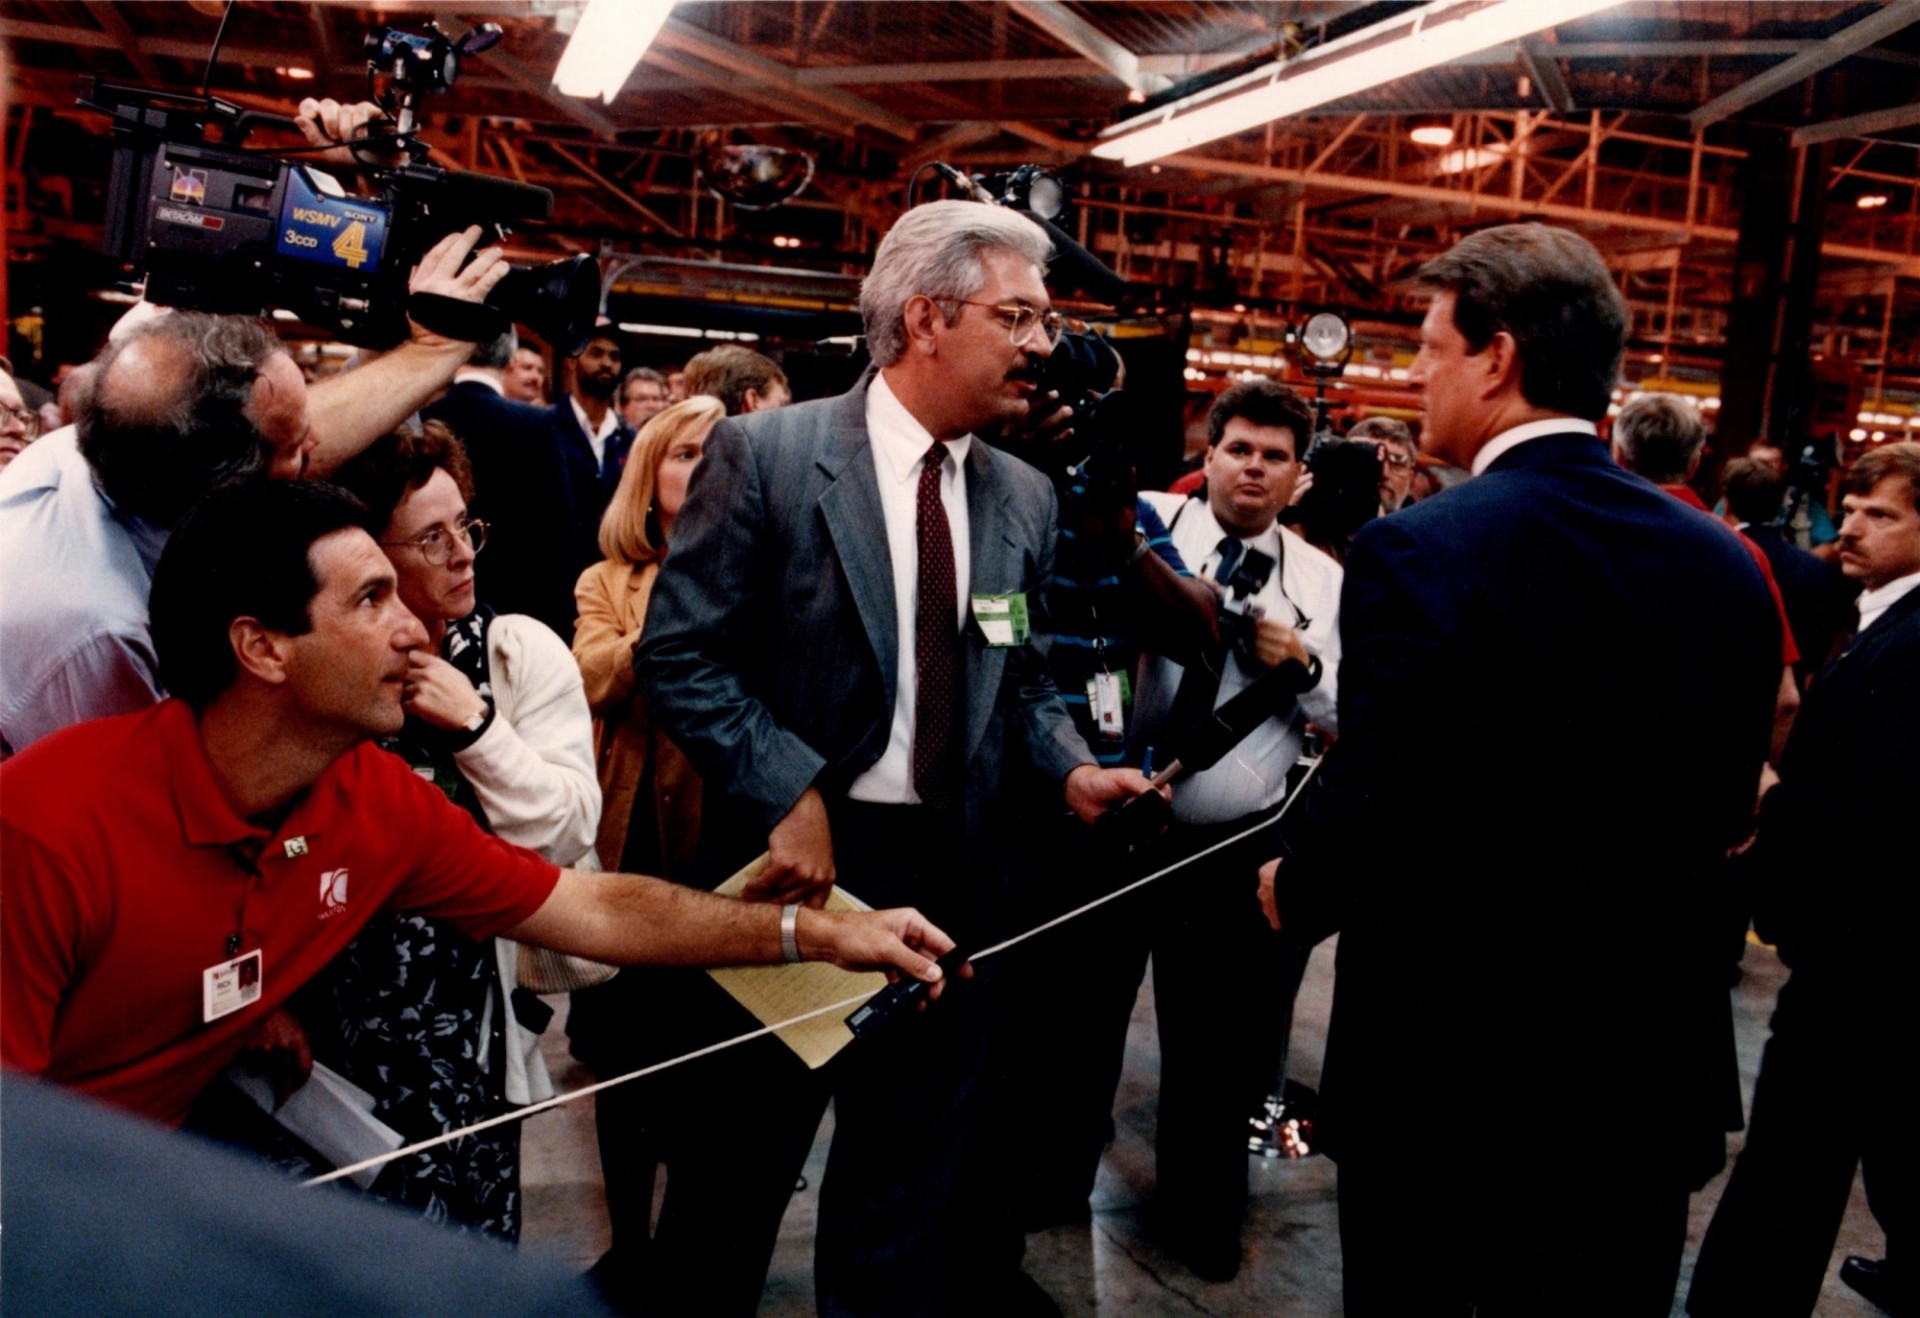 Williams questions Vice President Al Gore during Gore’s visit to the General Motors Saturn plant in Spring Hill, TN, in June 1993.